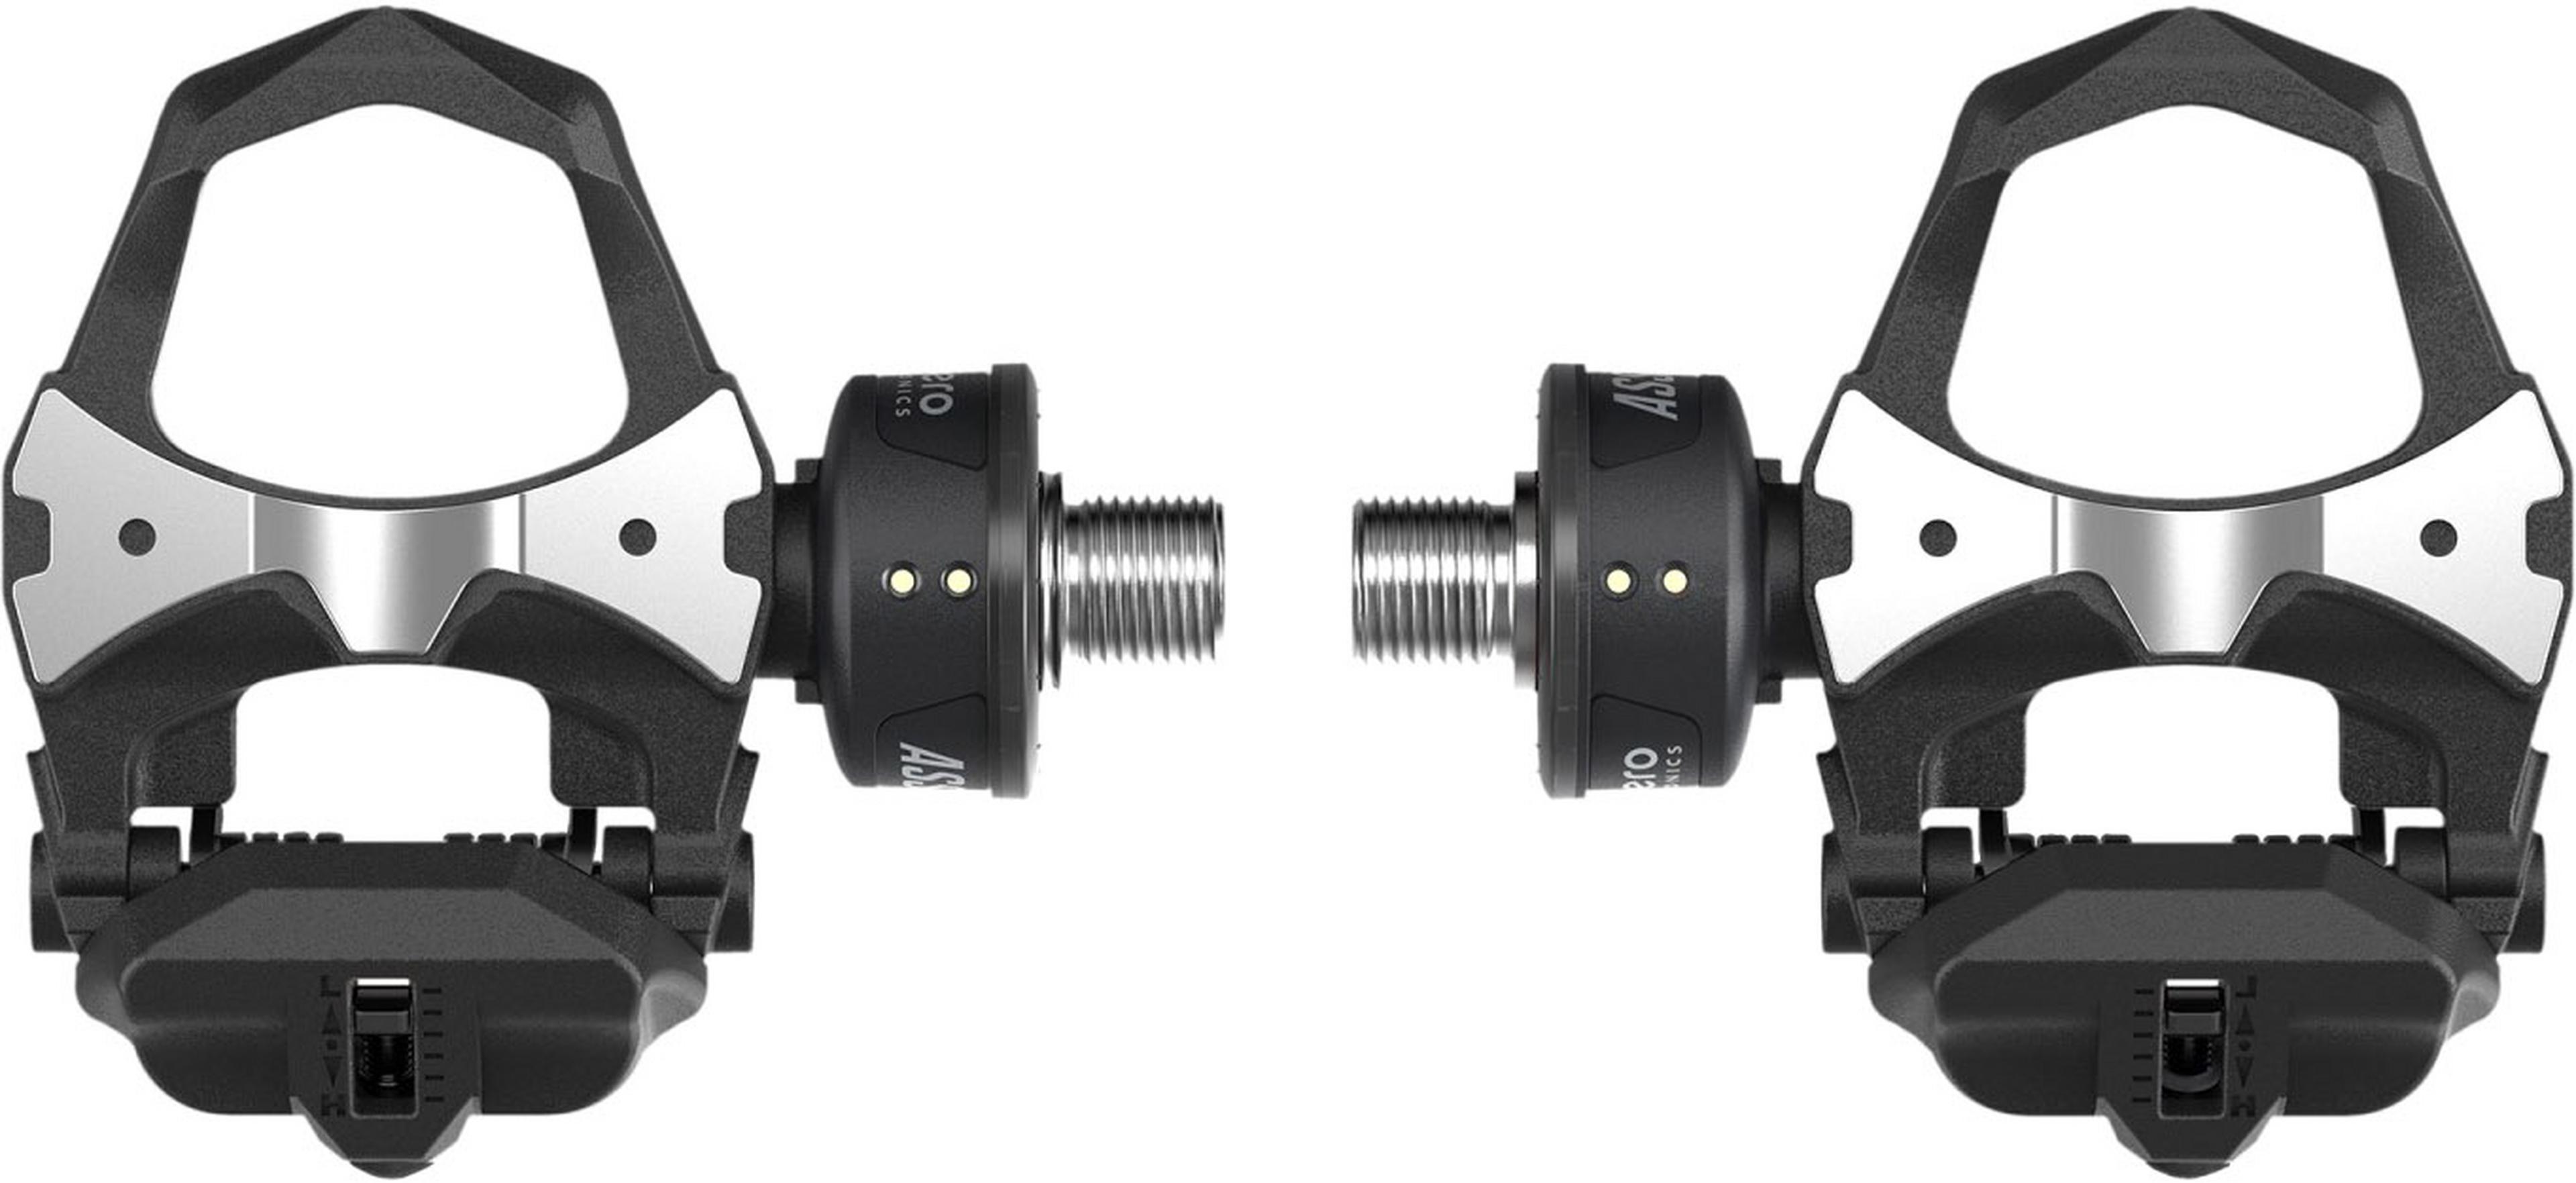 Favero Assioma DUO Power Meter Pedals | Chain Reaction